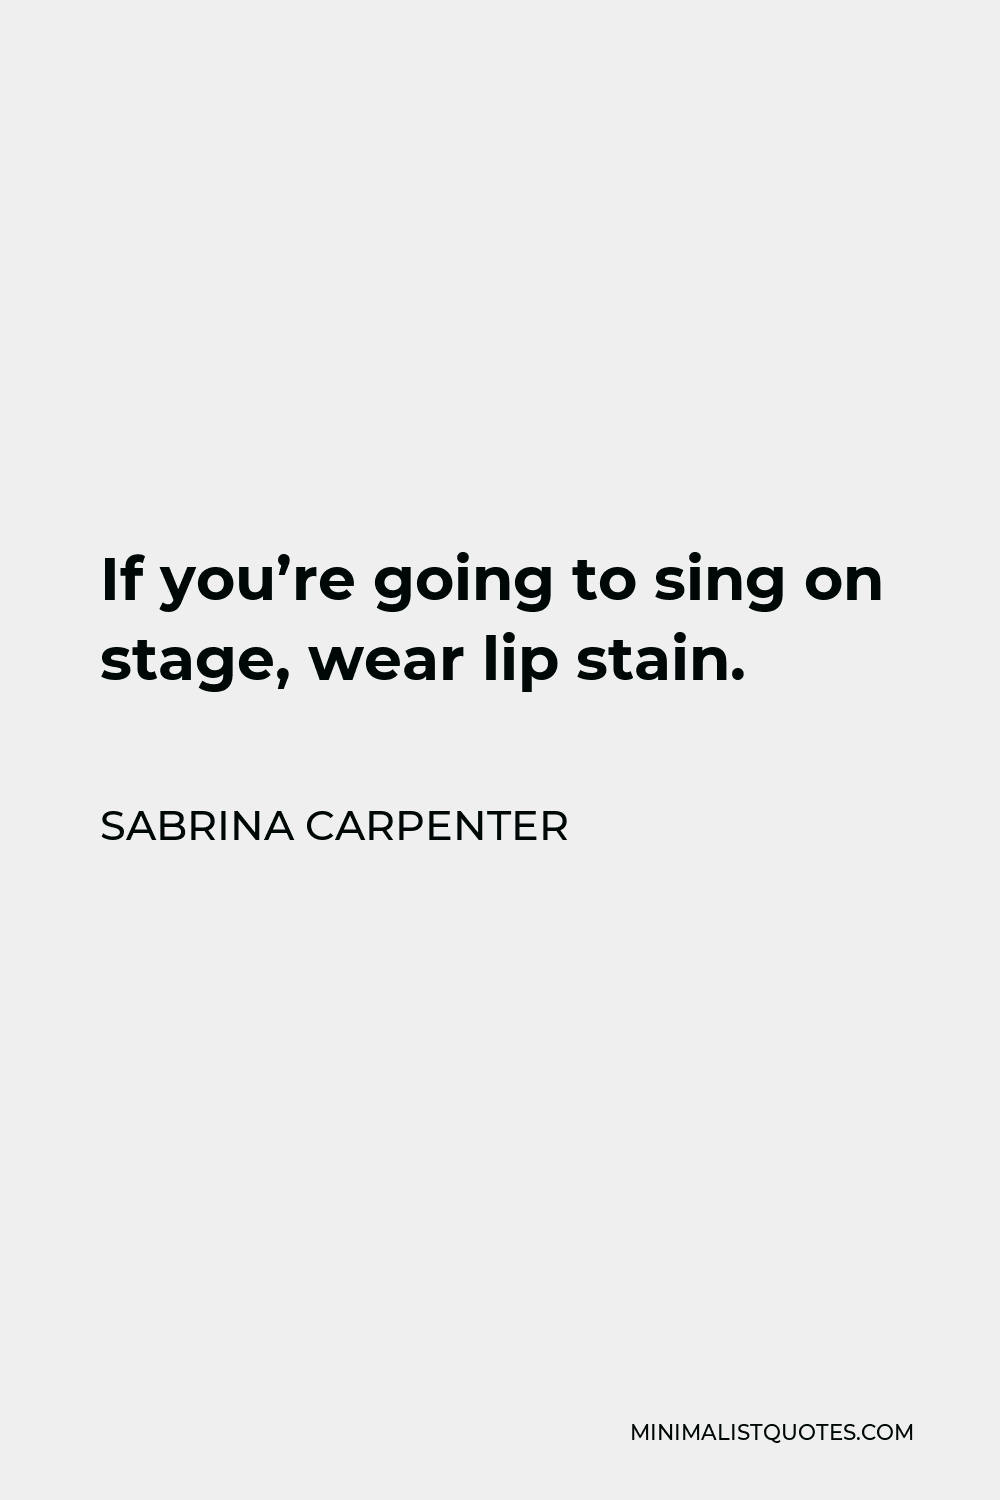 Sabrina Carpenter Quote - If you’re going to sing on stage, wear lip stain.